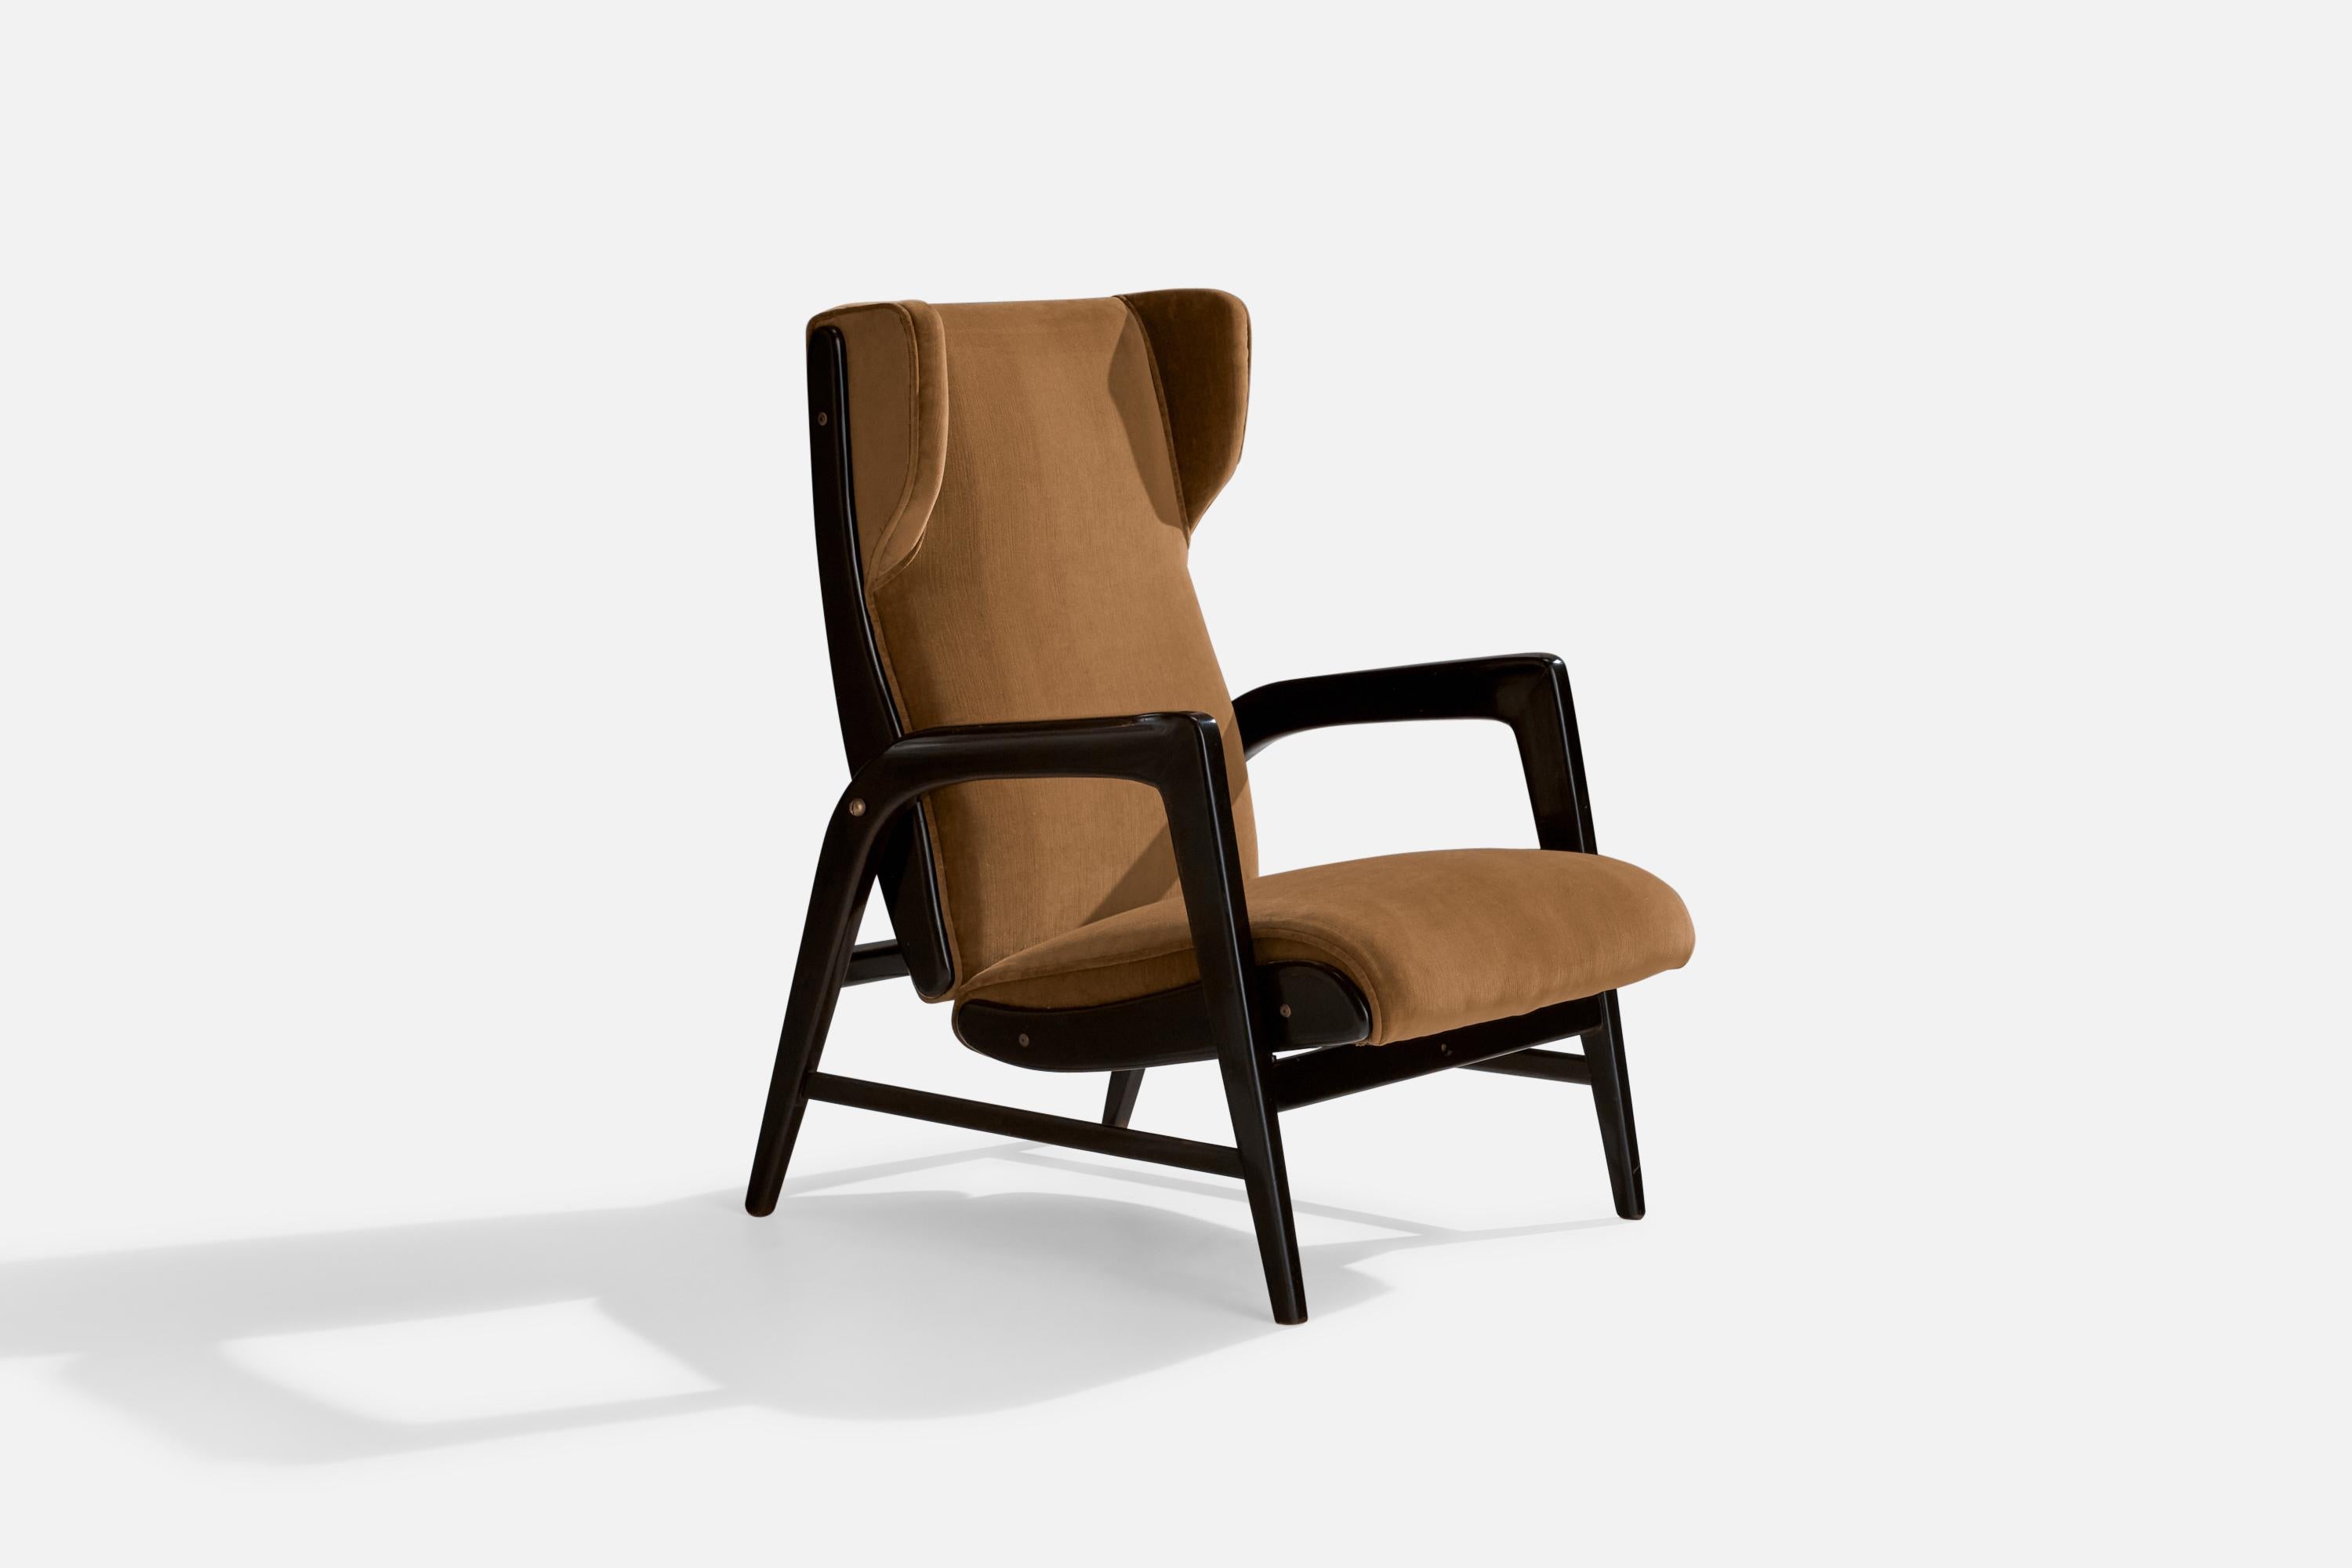 An adjustable ebonized wood, brass and velvet lounge chair designed by Gio Ponti and produced by Casa e Giardino, Italy, c. 1937

Seat height 16”.

Bibliography: Domus no. 113, 1937 unpaginated